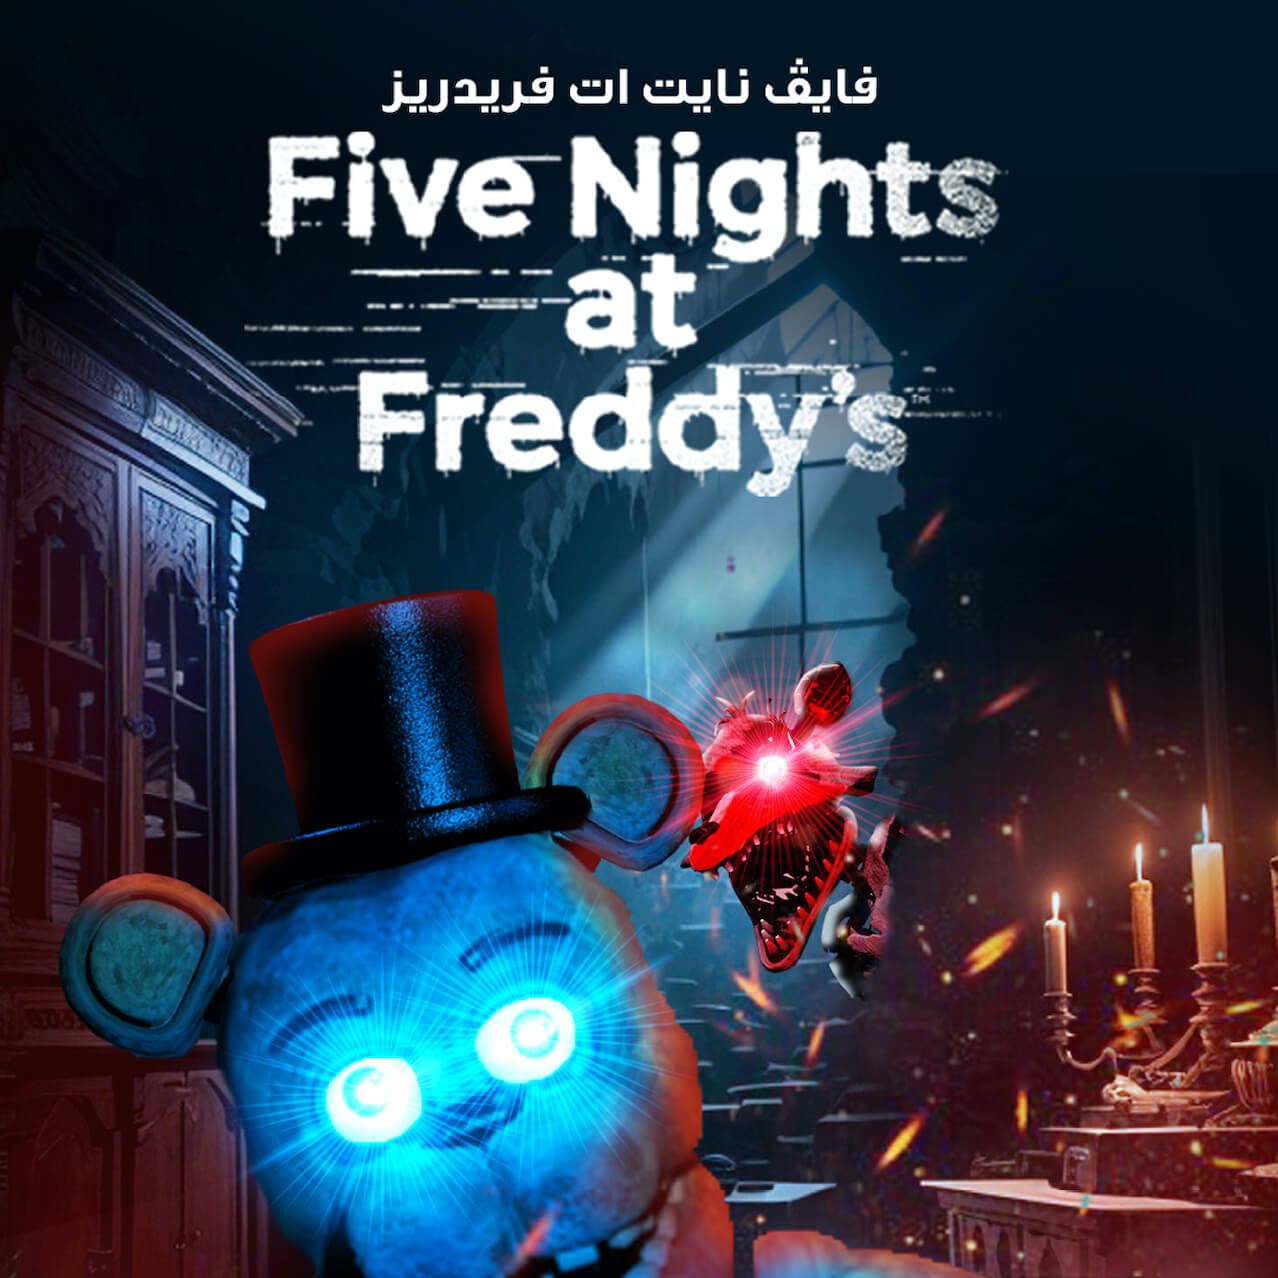 Five Nights At Freddy's 4, Poster